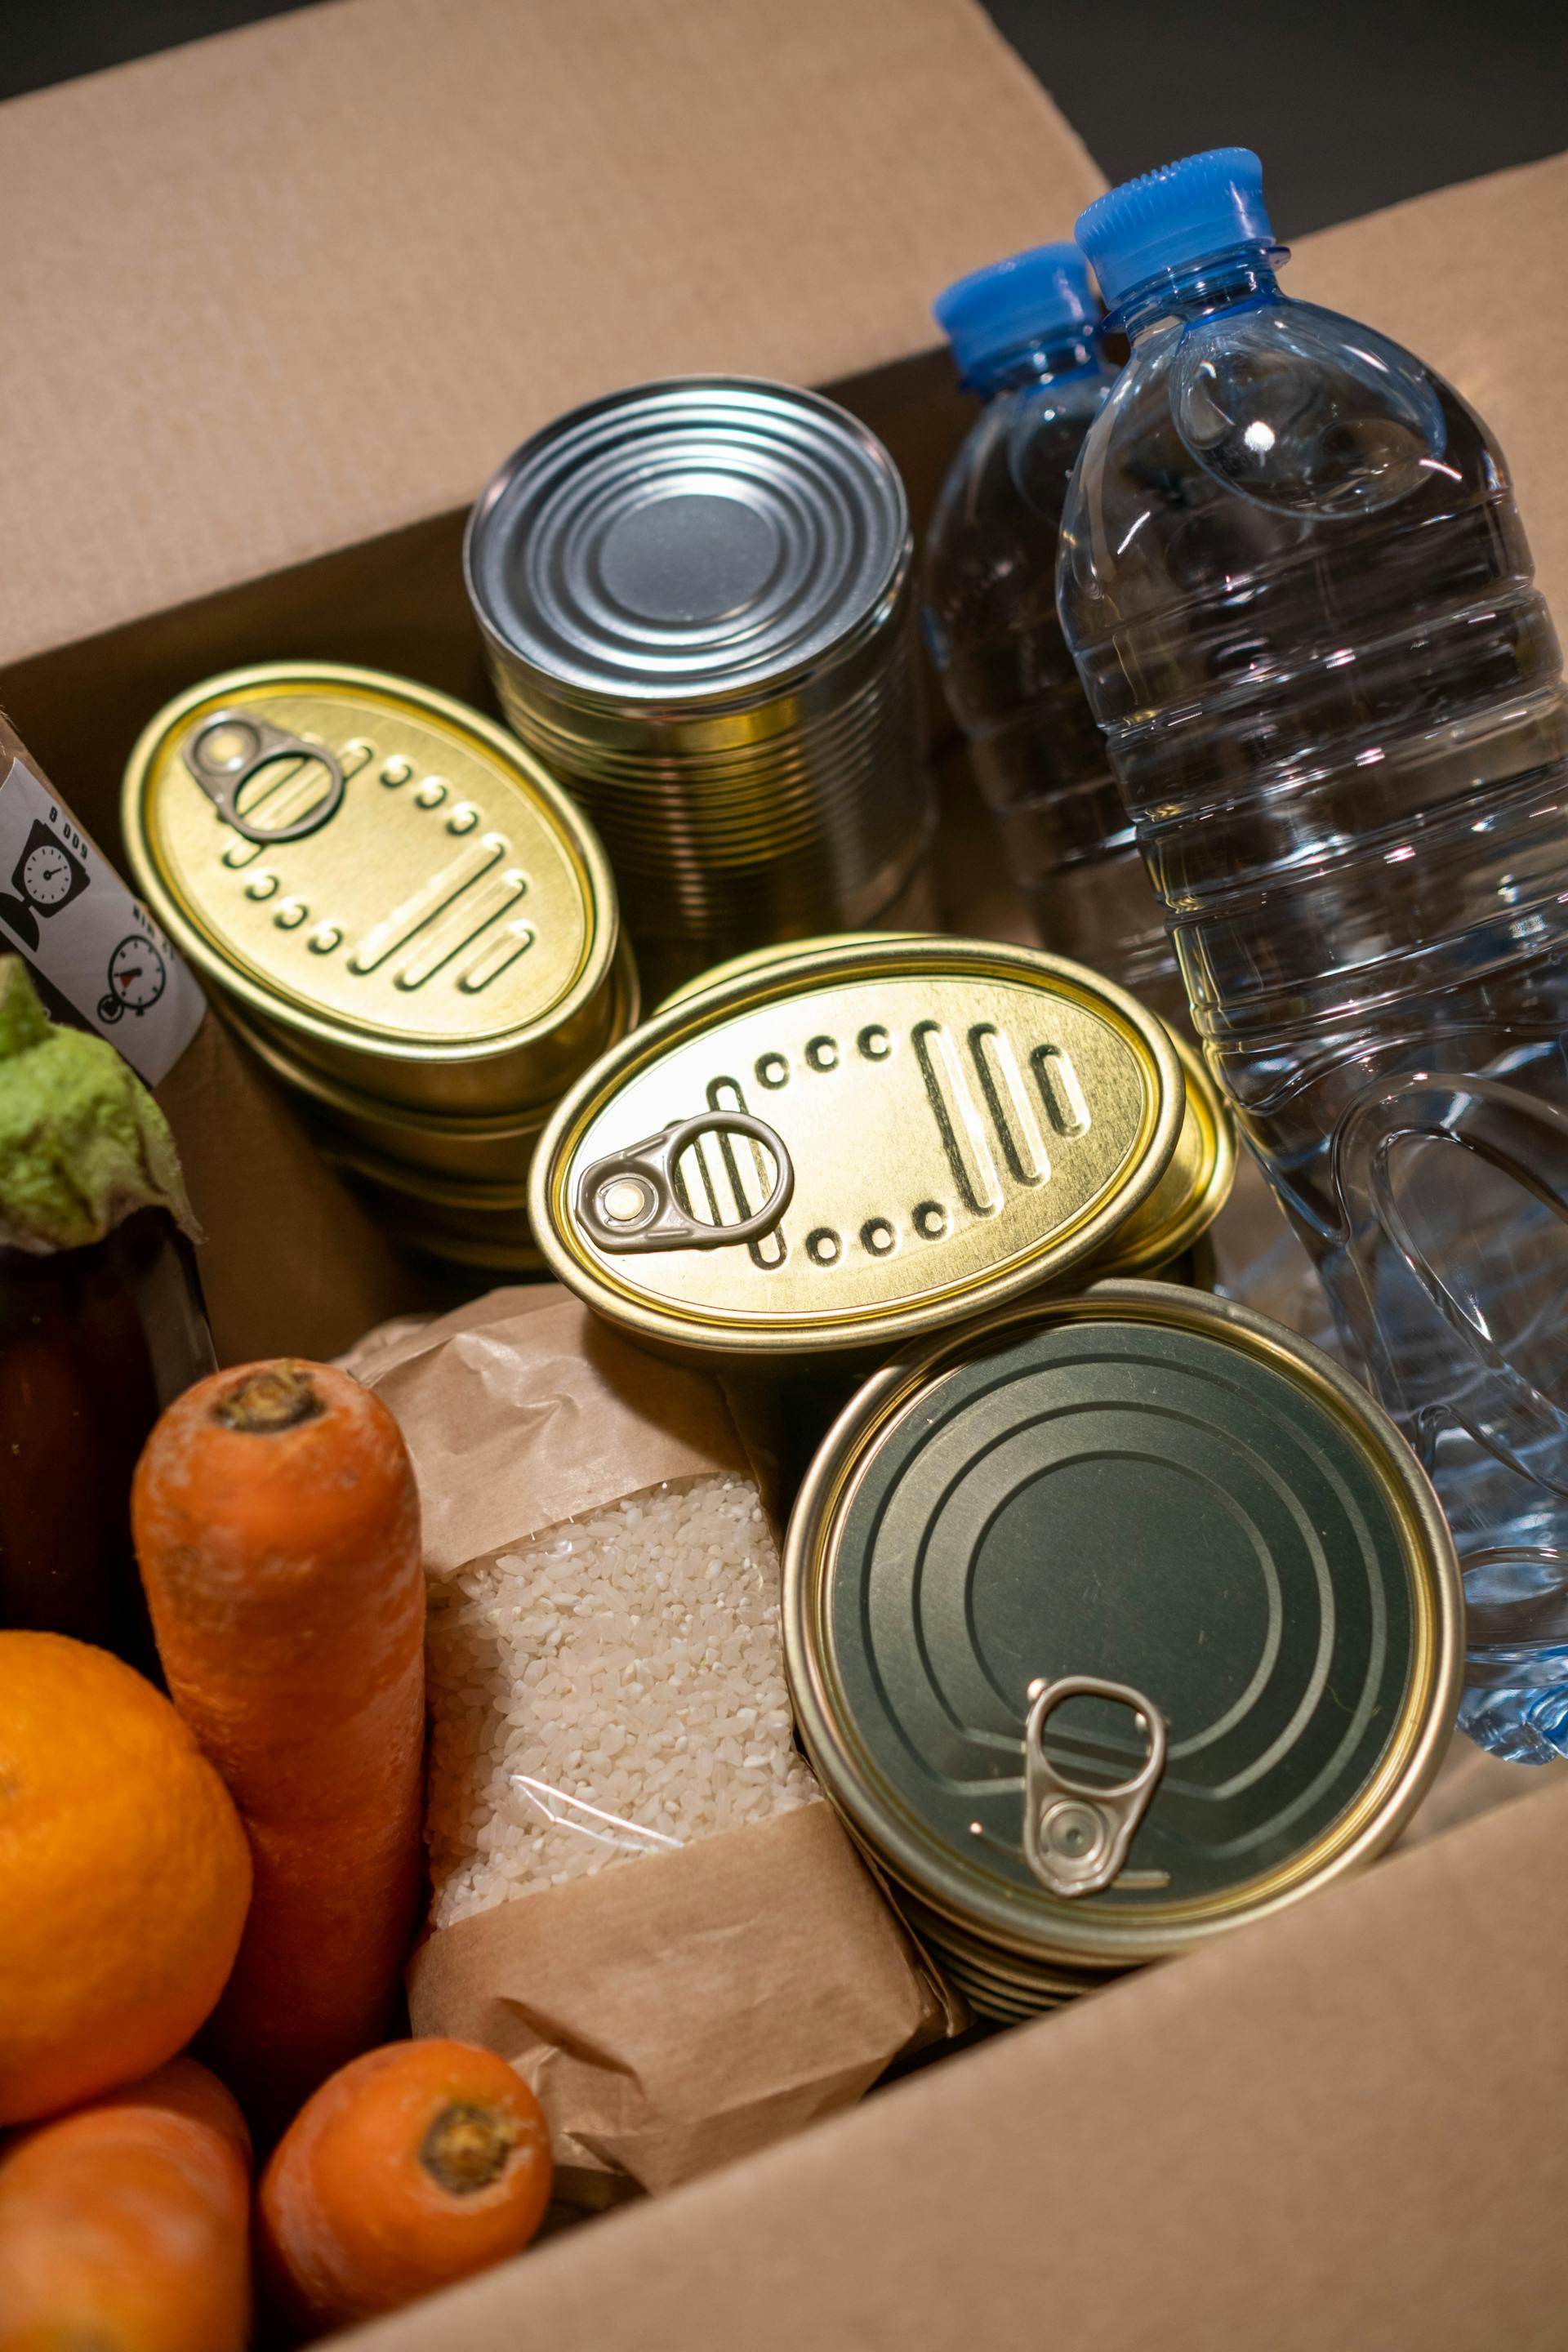 Food donation with cans, water bottles, and fresh vegetables | Source: Pexels